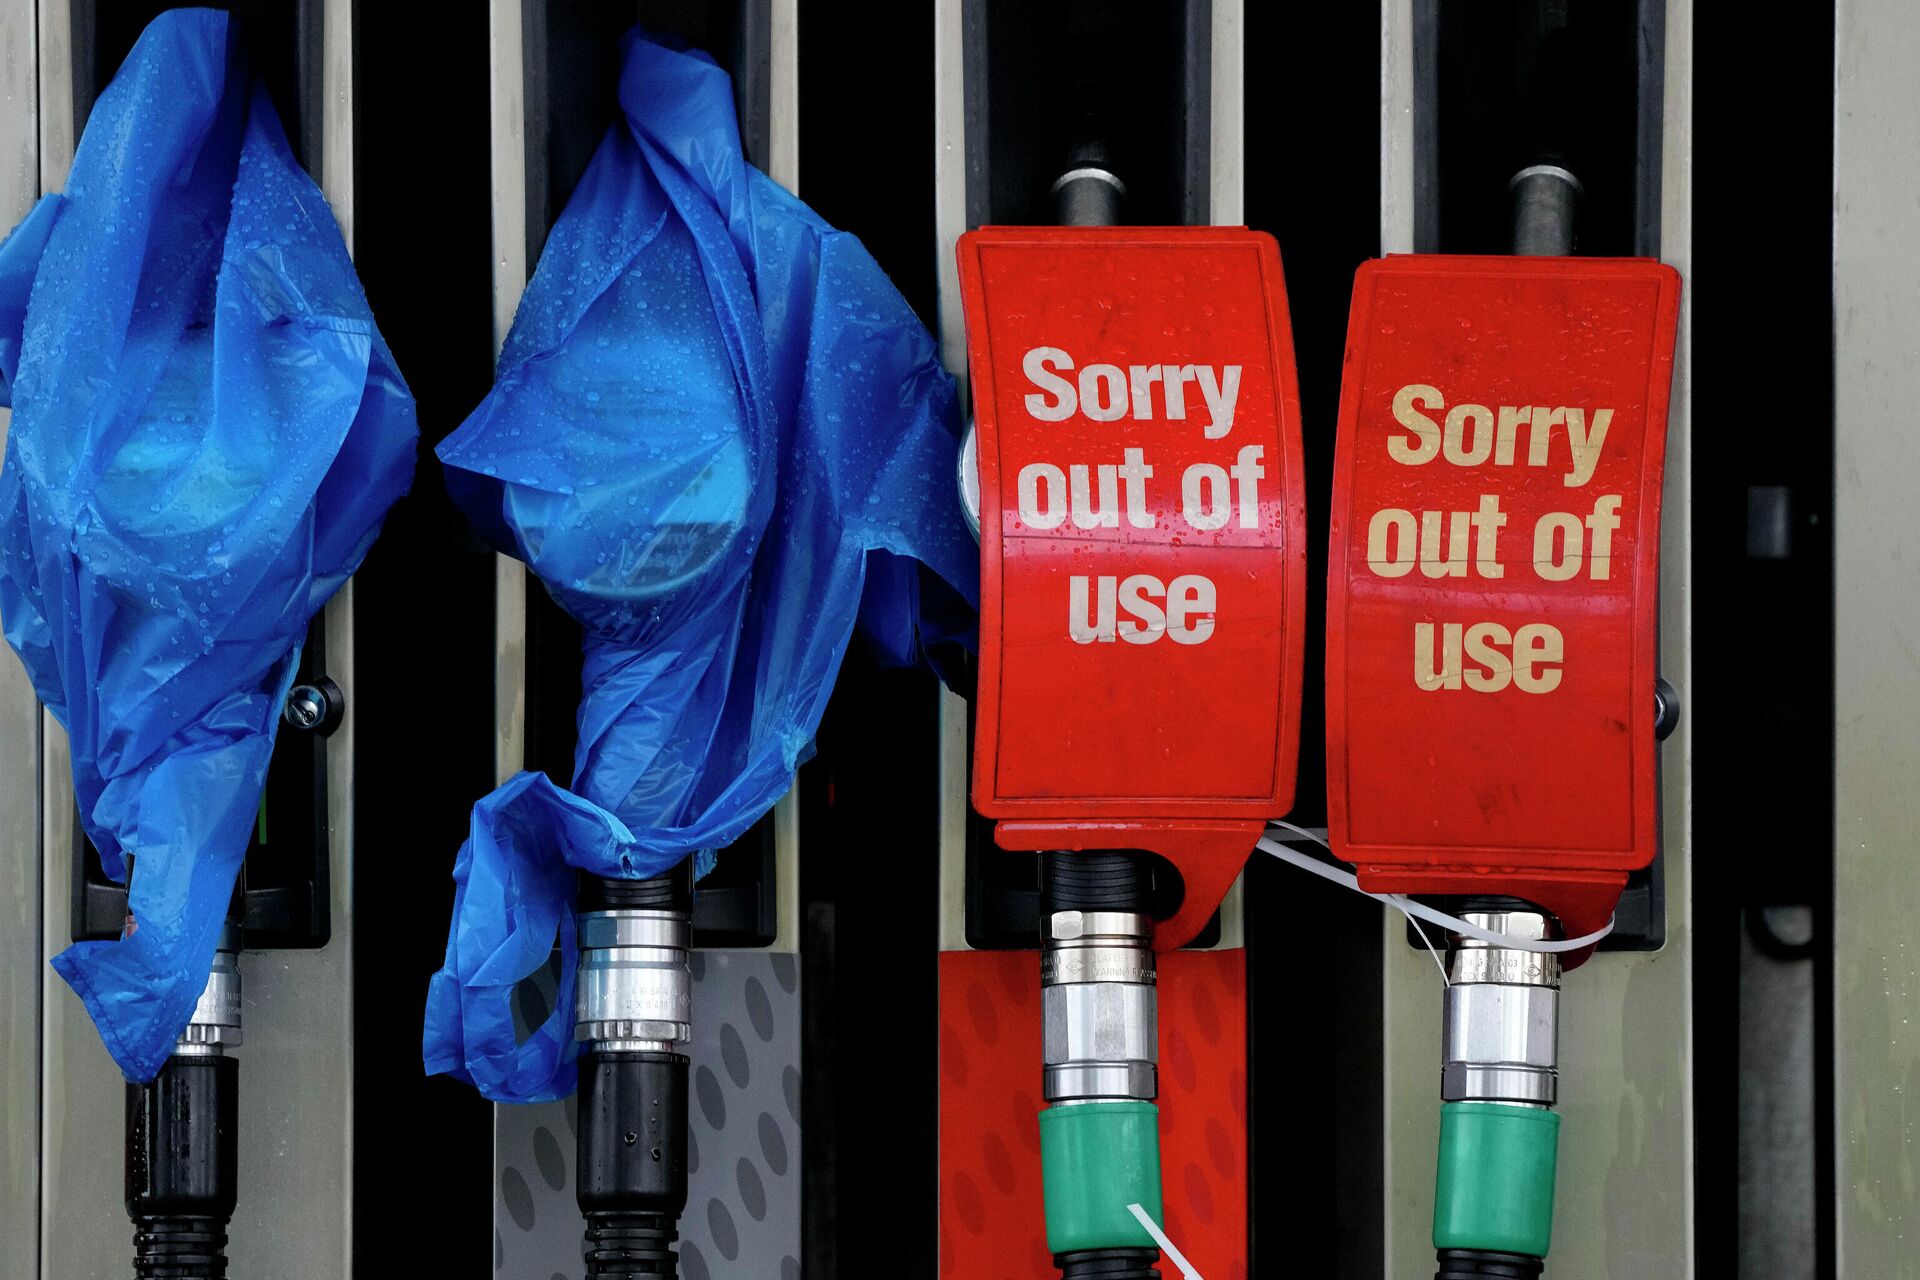 FILE - In this Sept. 30, 2021, file photo, fuel pumps are marked out of use at a petrol station in London. Britain is experiencing empty gas pumps, worker shortages and gaps on store shelves - Sputnik International, 1920, 23.10.2021